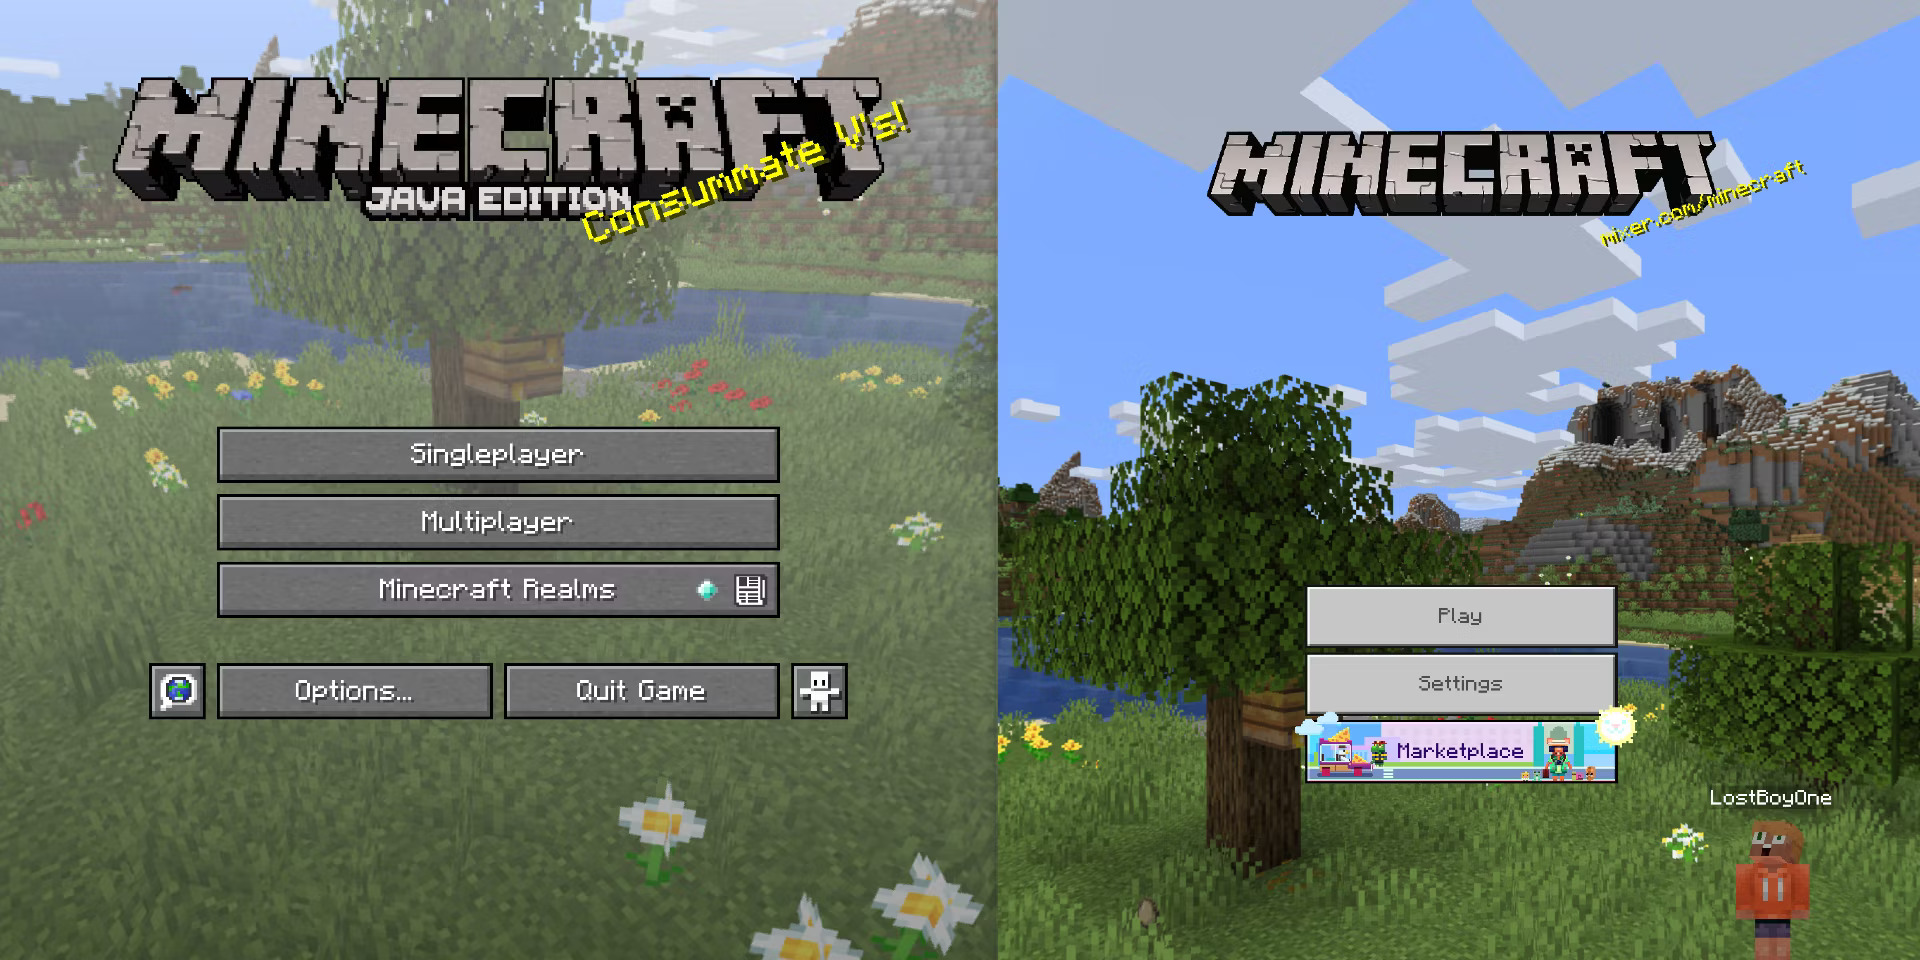 What Are The Differences Between Minecraft Java, Bedrock, and Windows Edition